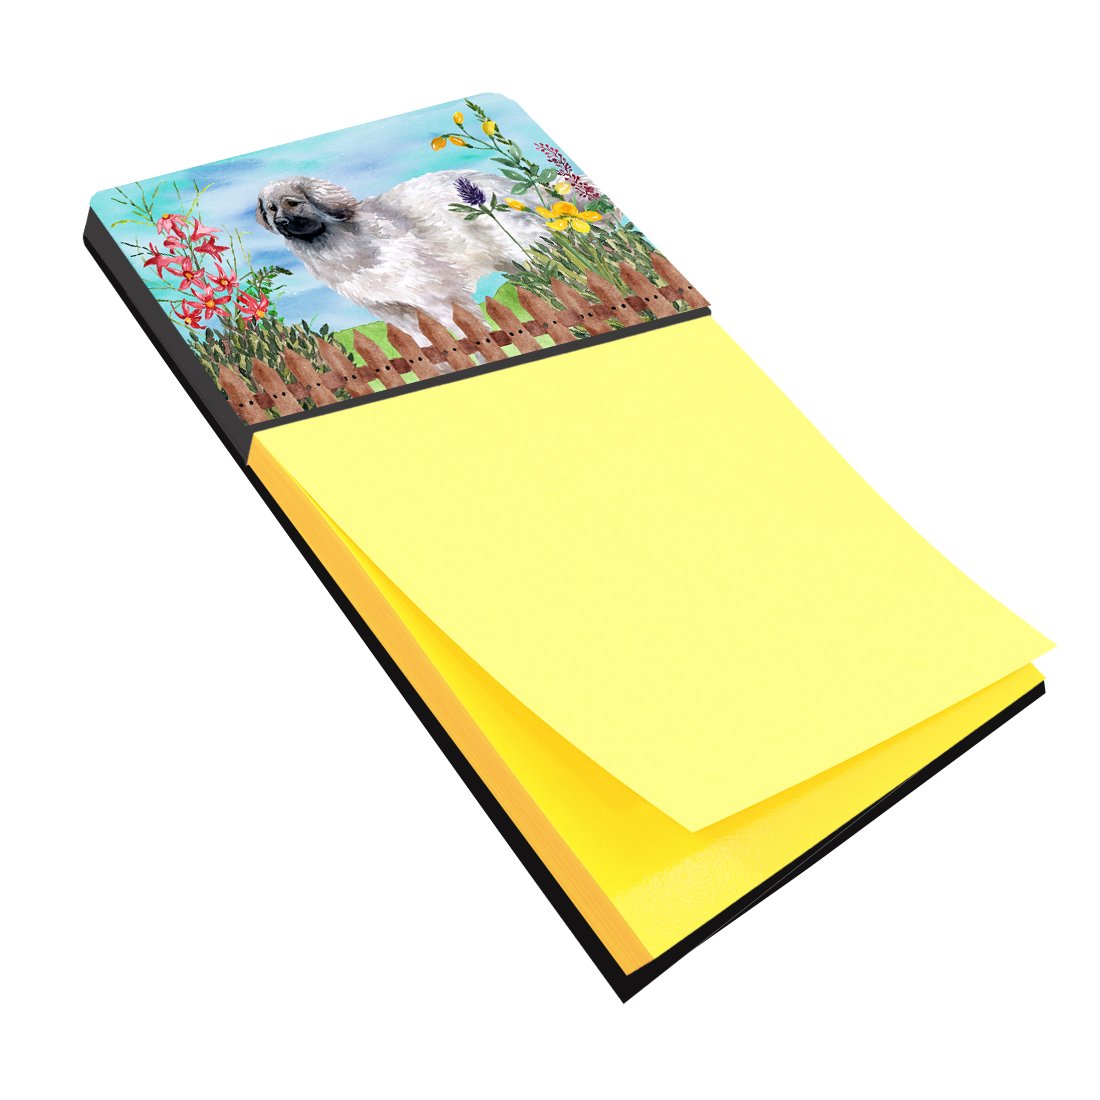 Moscow Watchdog Spring Sticky Note Holder CK1235SN by Caroline's Treasures